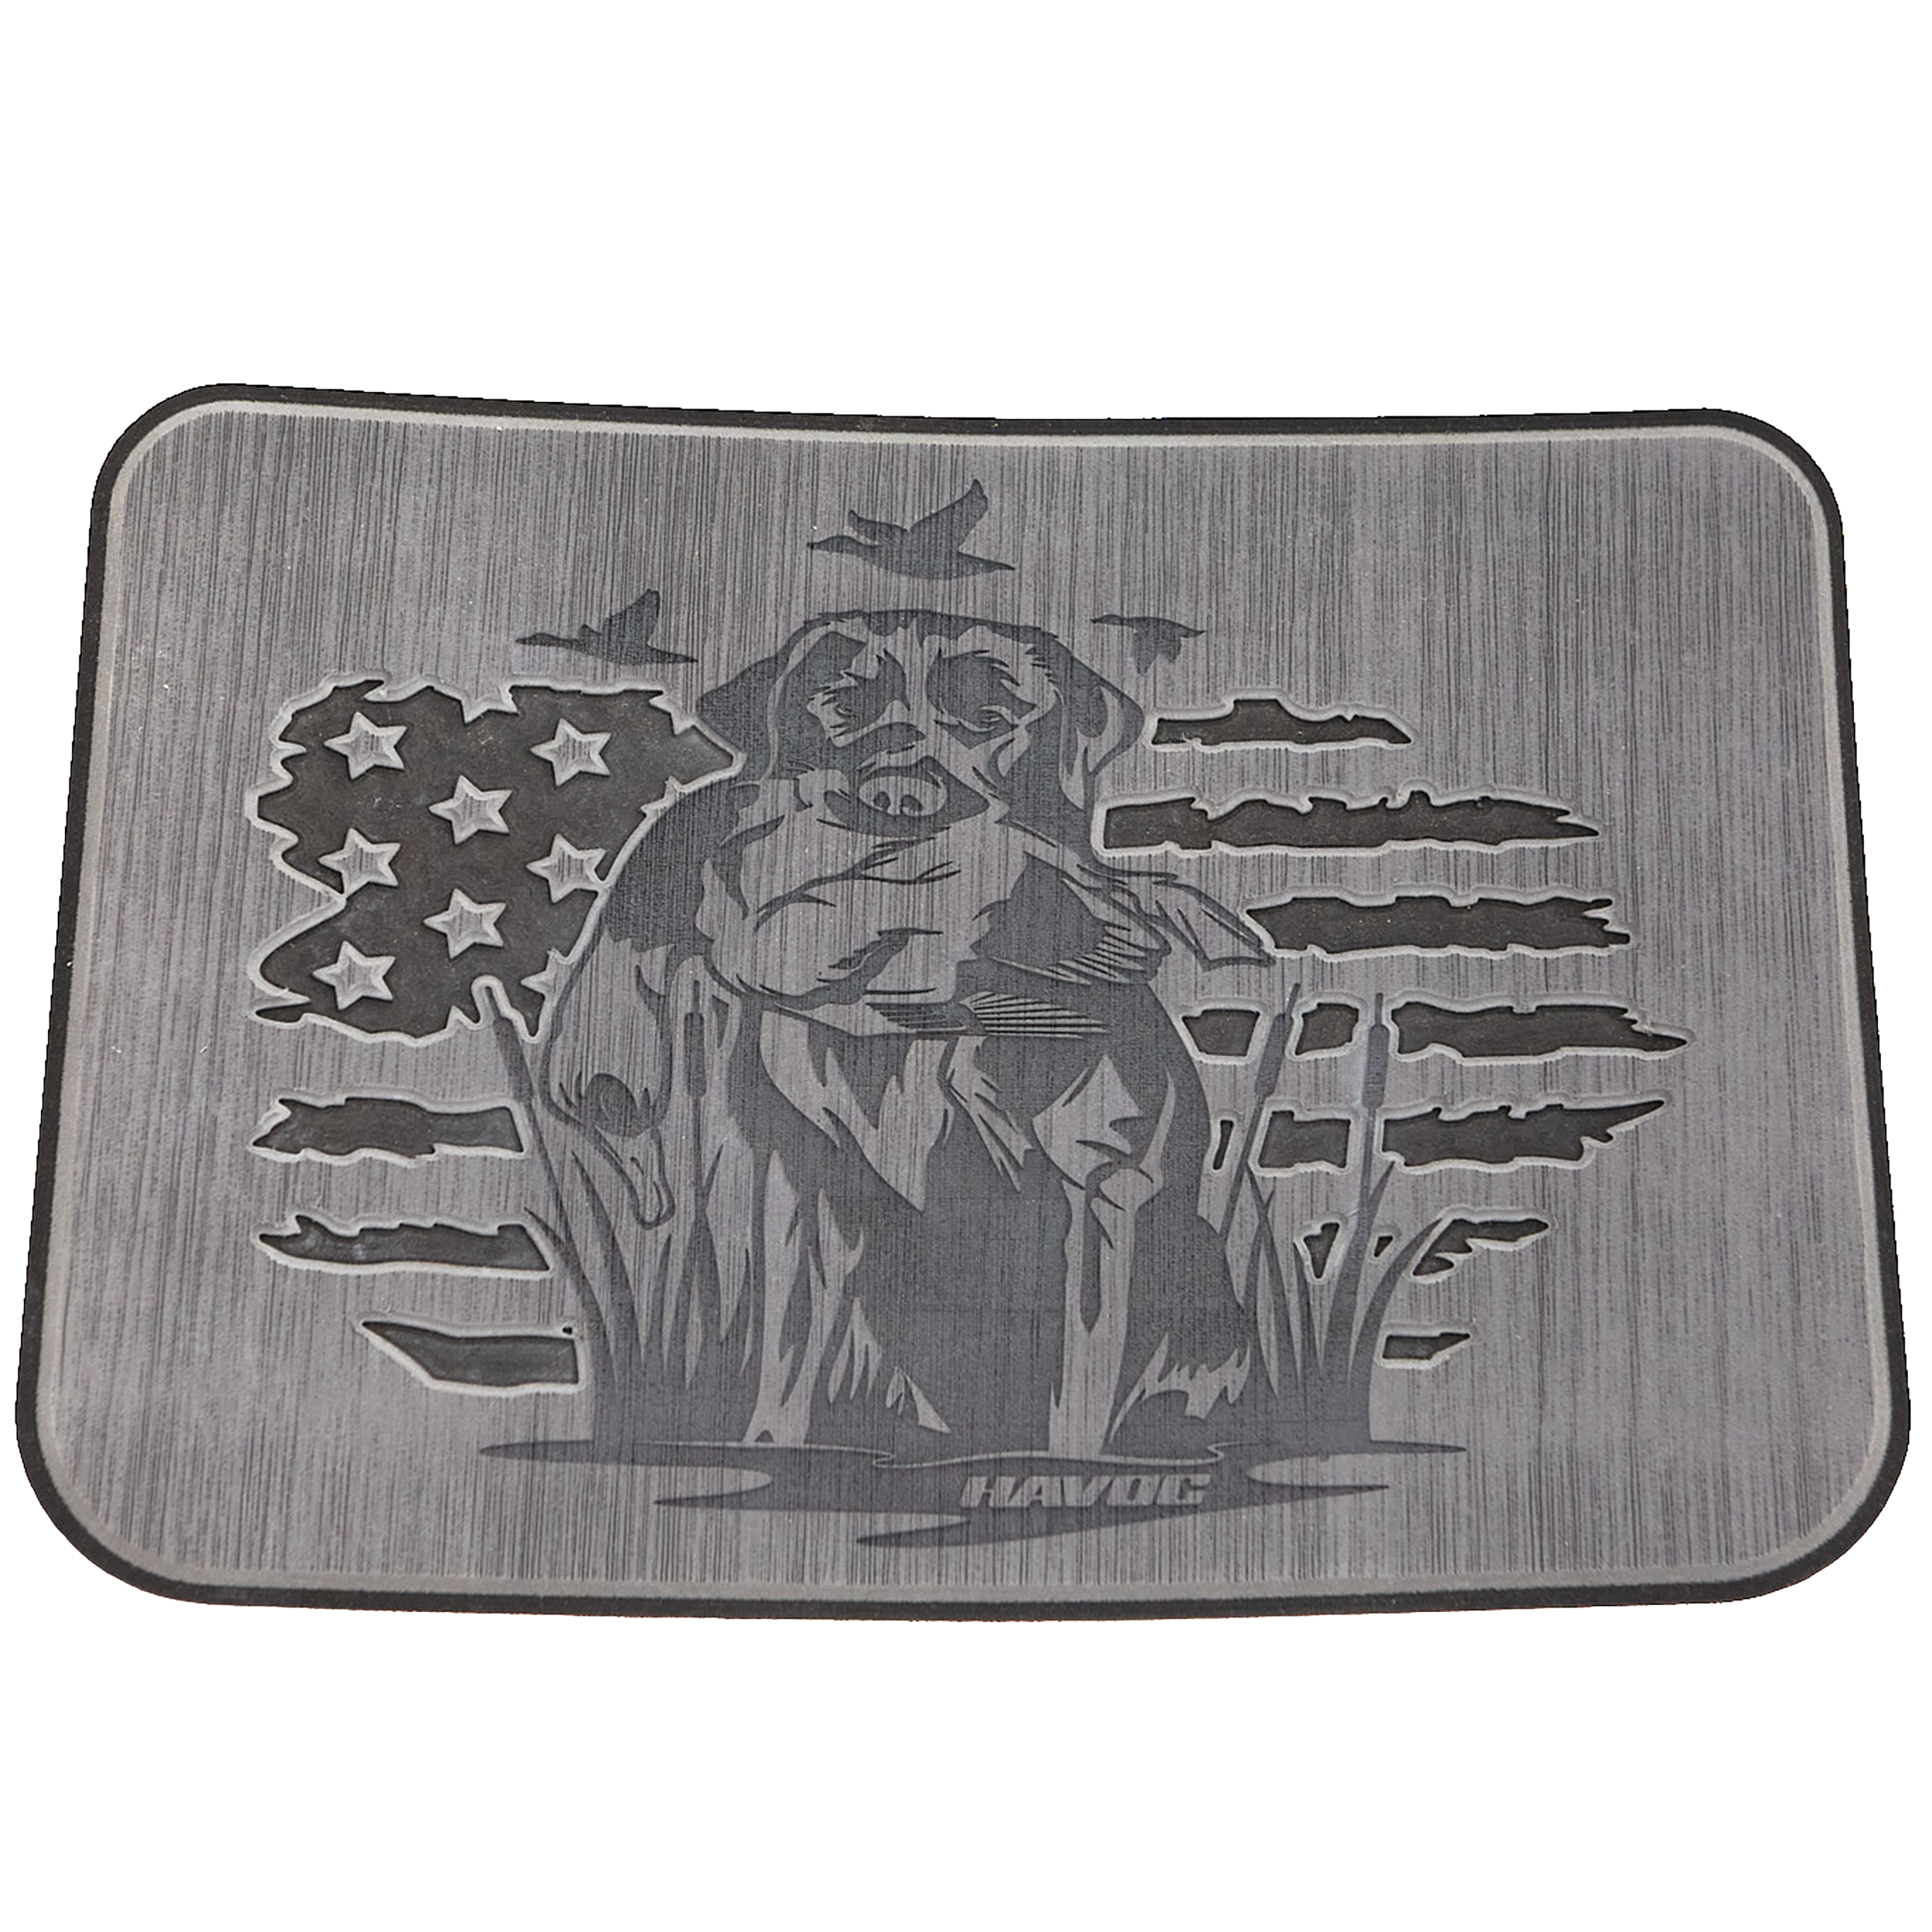 Yeti Cooler Pad -  American Flag with Lab/Duck & Havoc logo (Multiple Colors)